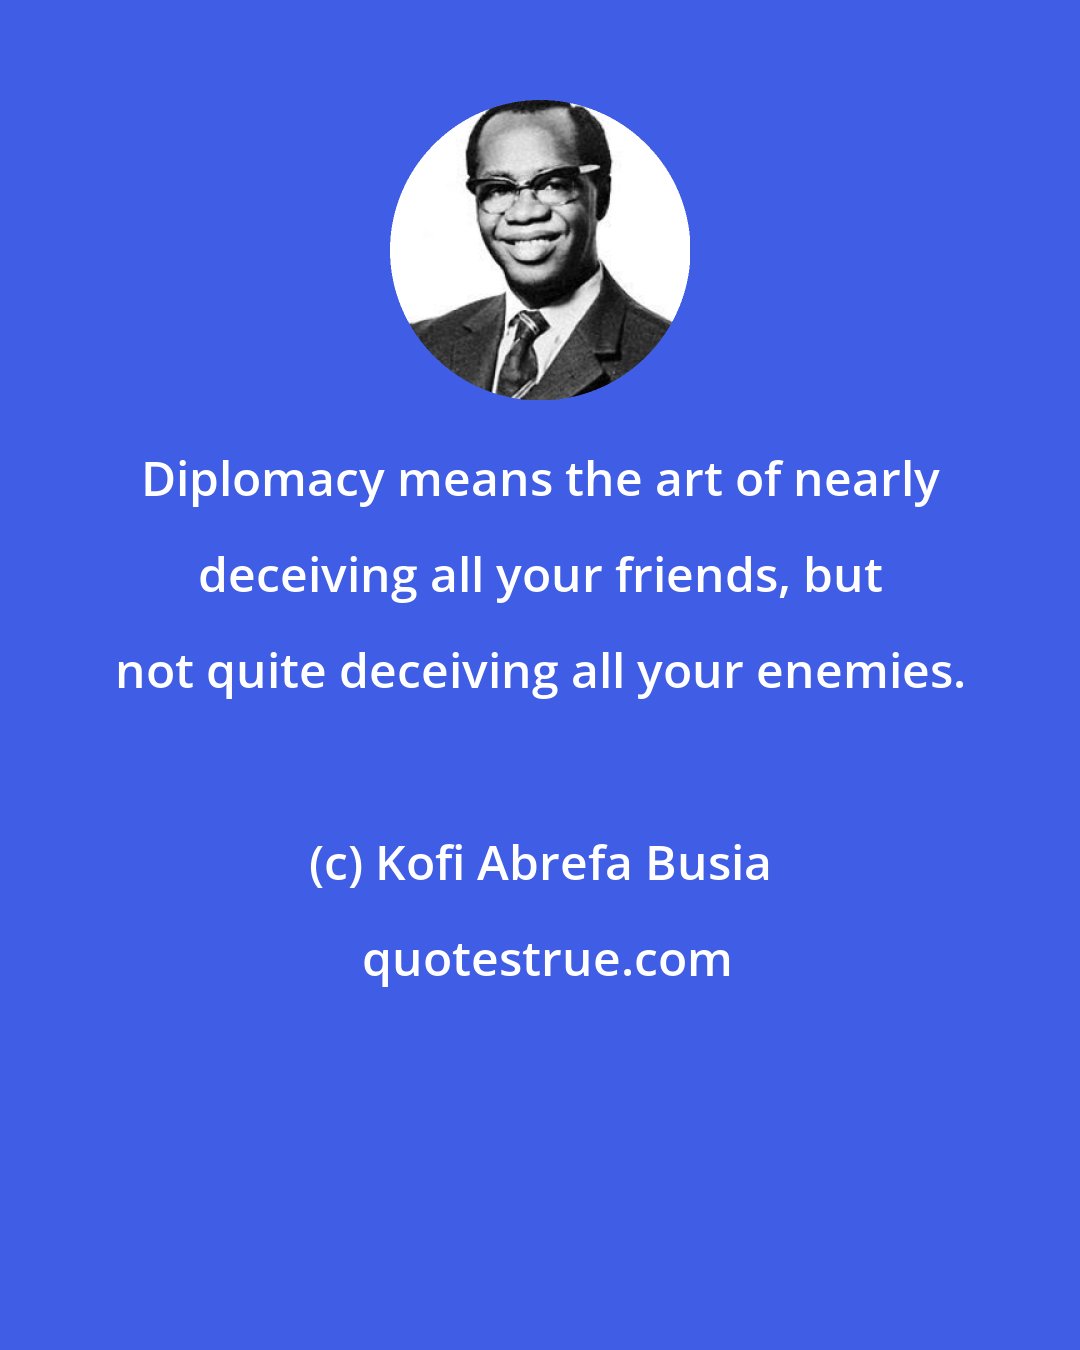 Kofi Abrefa Busia: Diplomacy means the art of nearly deceiving all your friends, but not quite deceiving all your enemies.